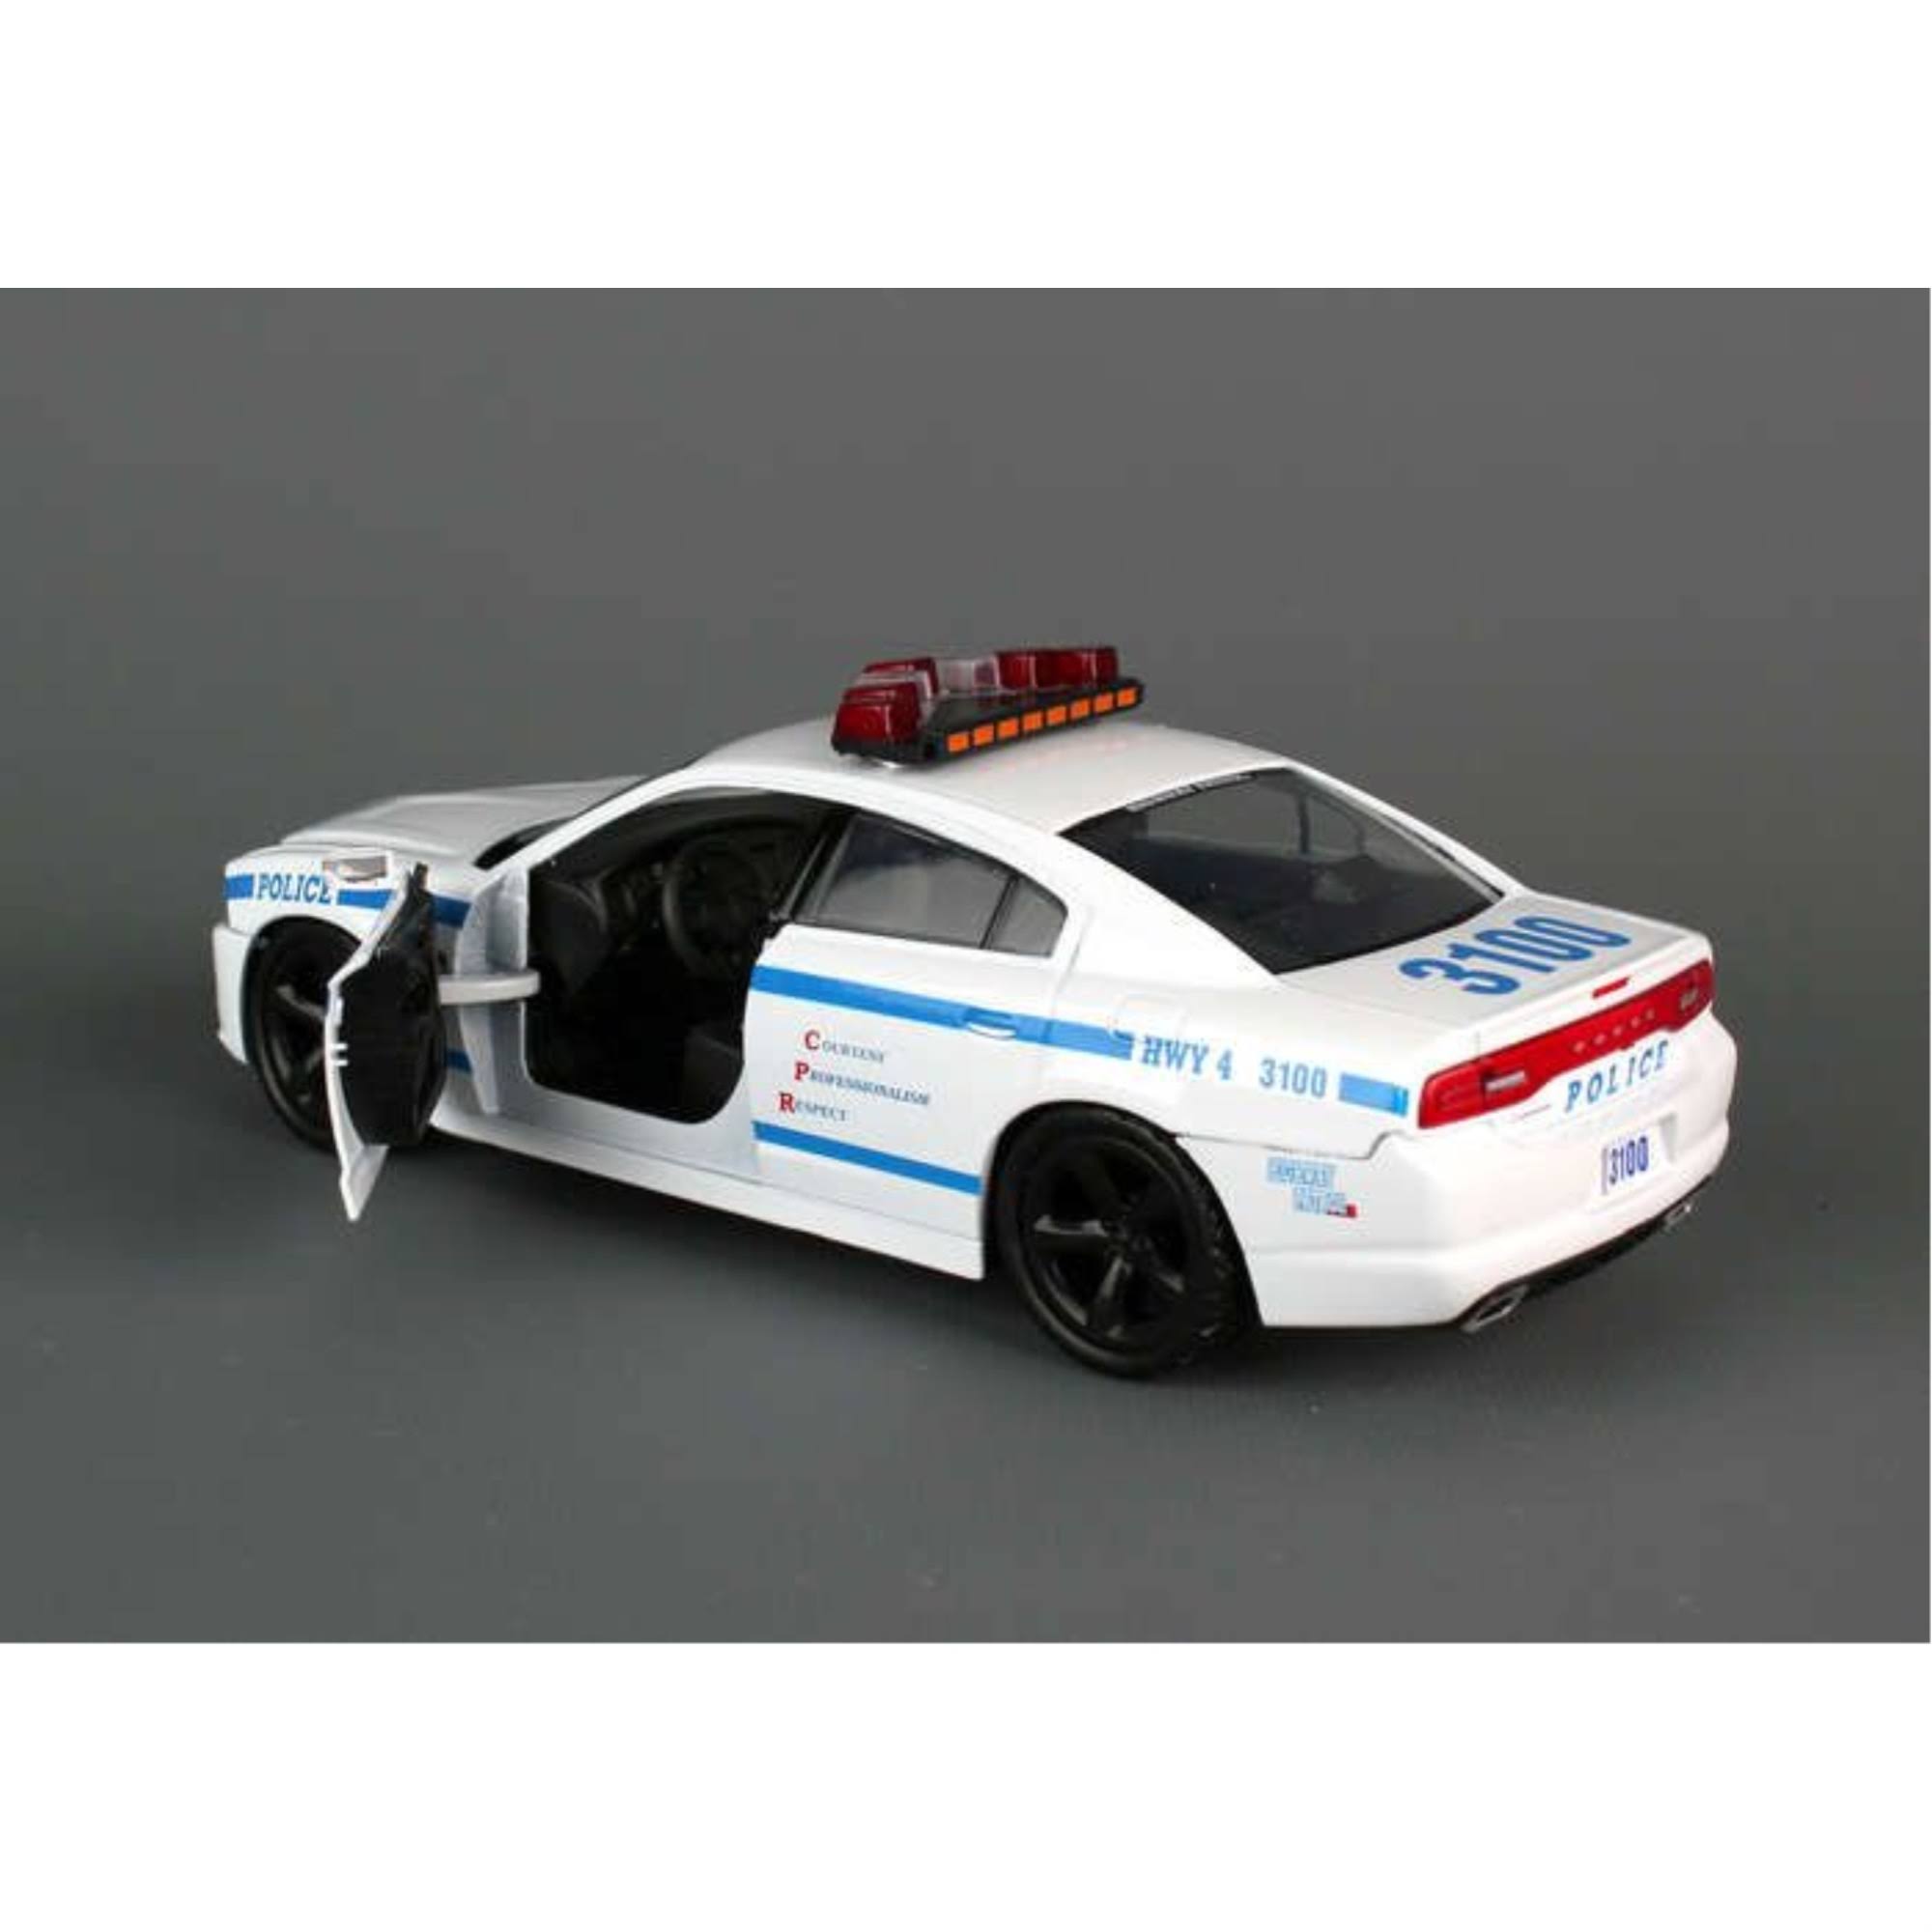 Daron Ny71693 NYPD Dodge Charger 1/24